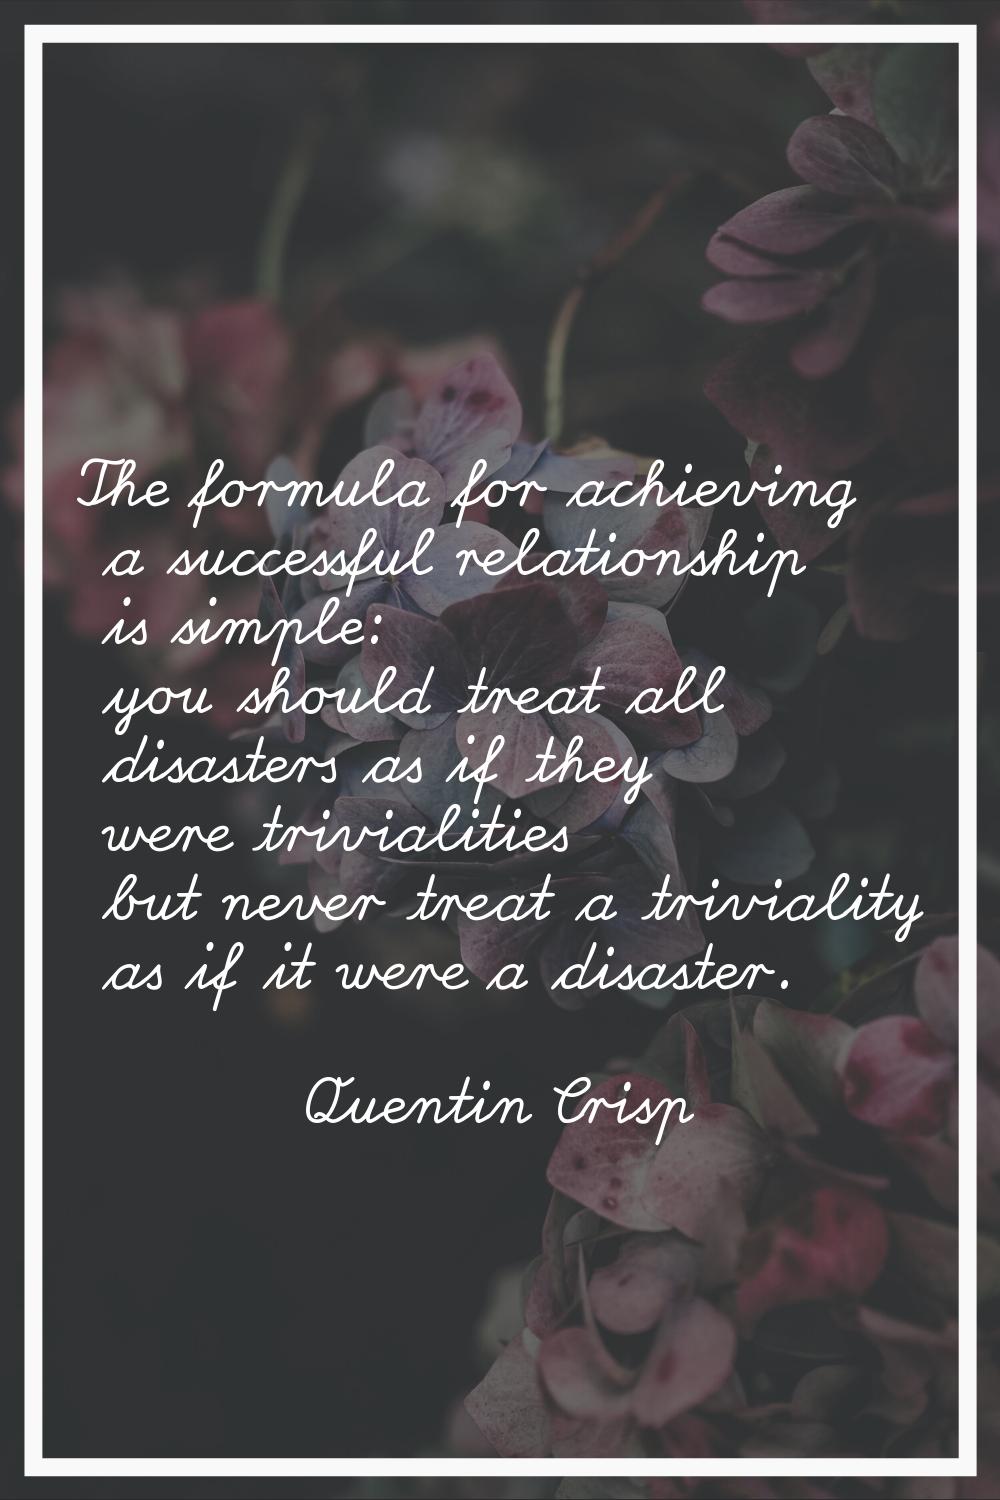 The formula for achieving a successful relationship is simple: you should treat all disasters as if